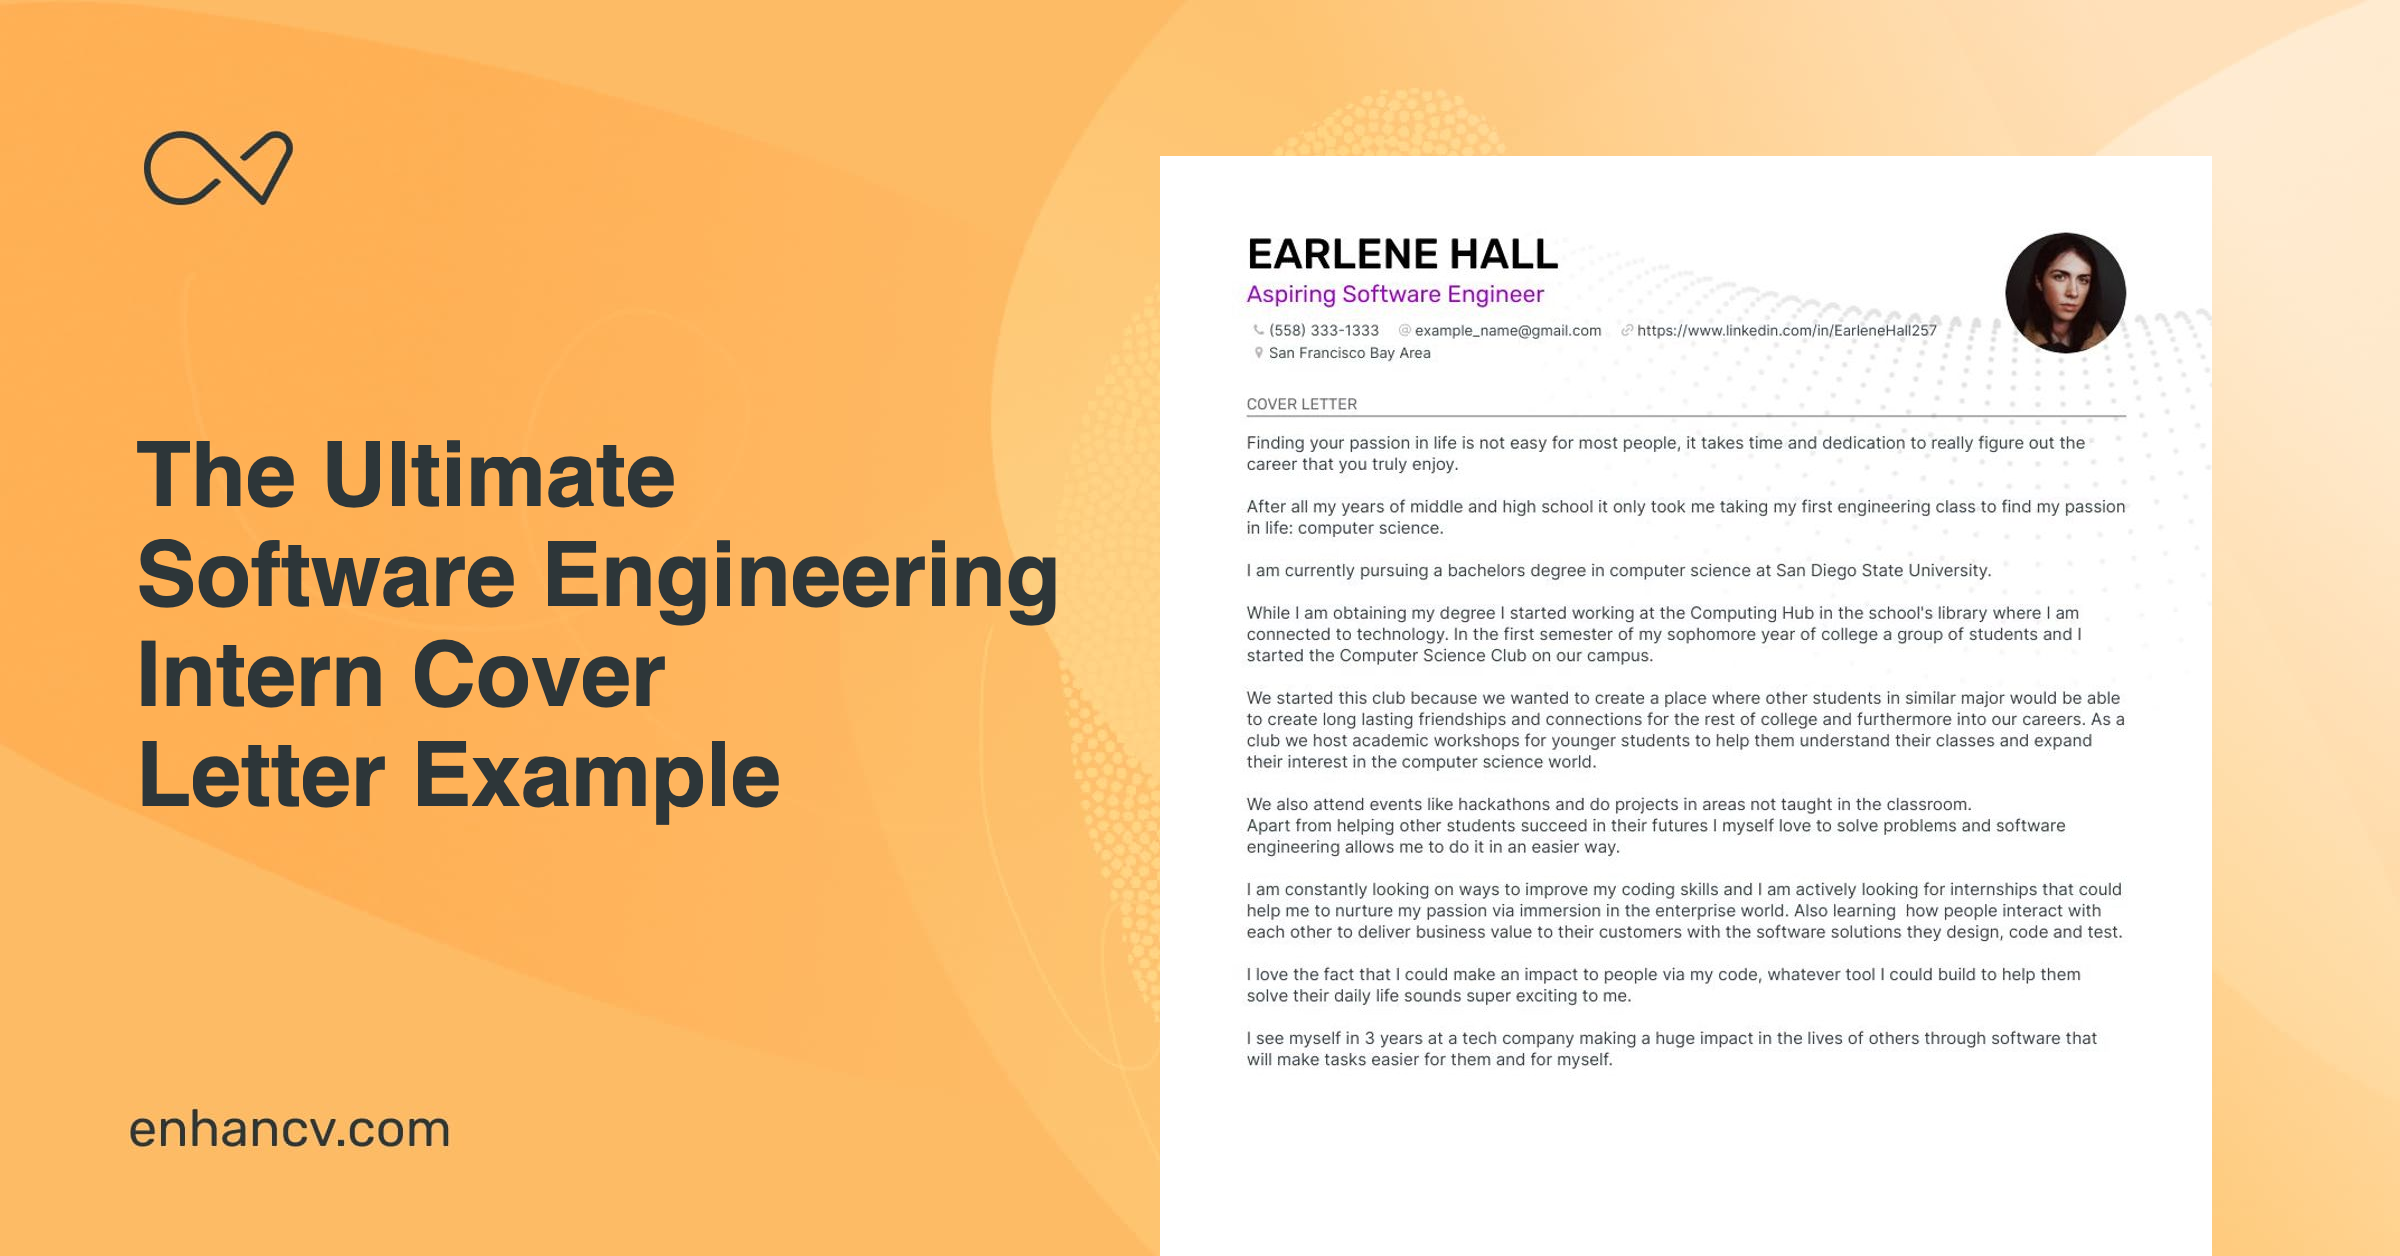 Top Software Engineering Intern Cover Letter Examples for 2023